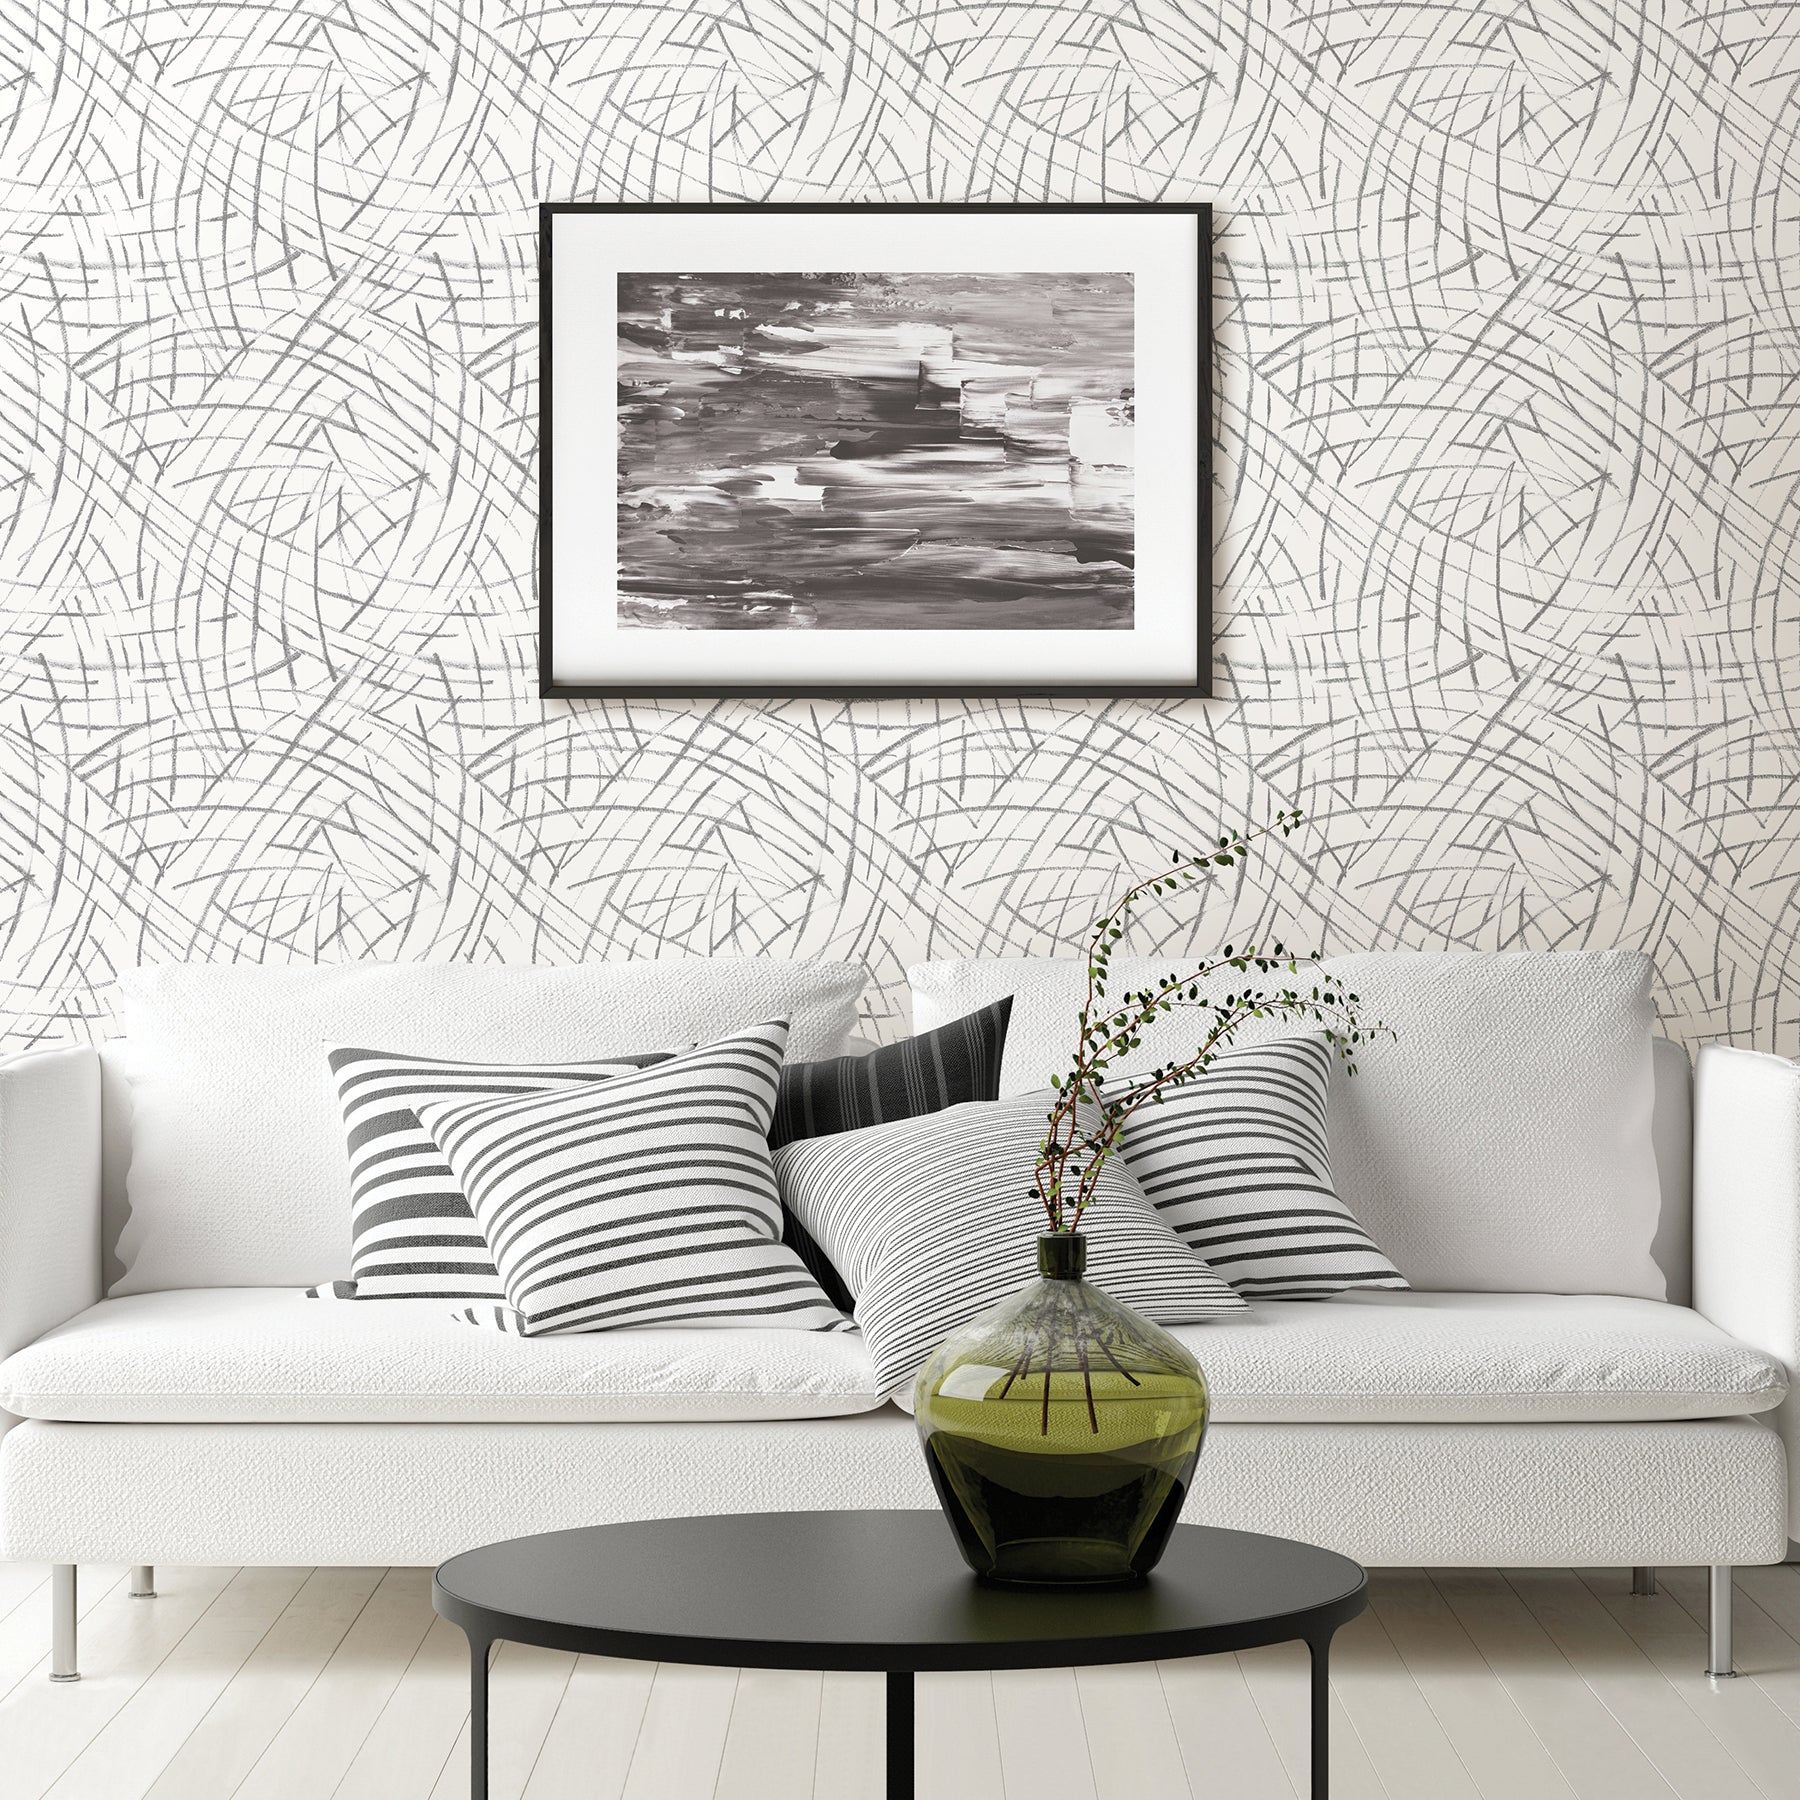 View 2902-25507 Theory Willy Nilly Grey Brushstrokes A Street Prints Wallpaper